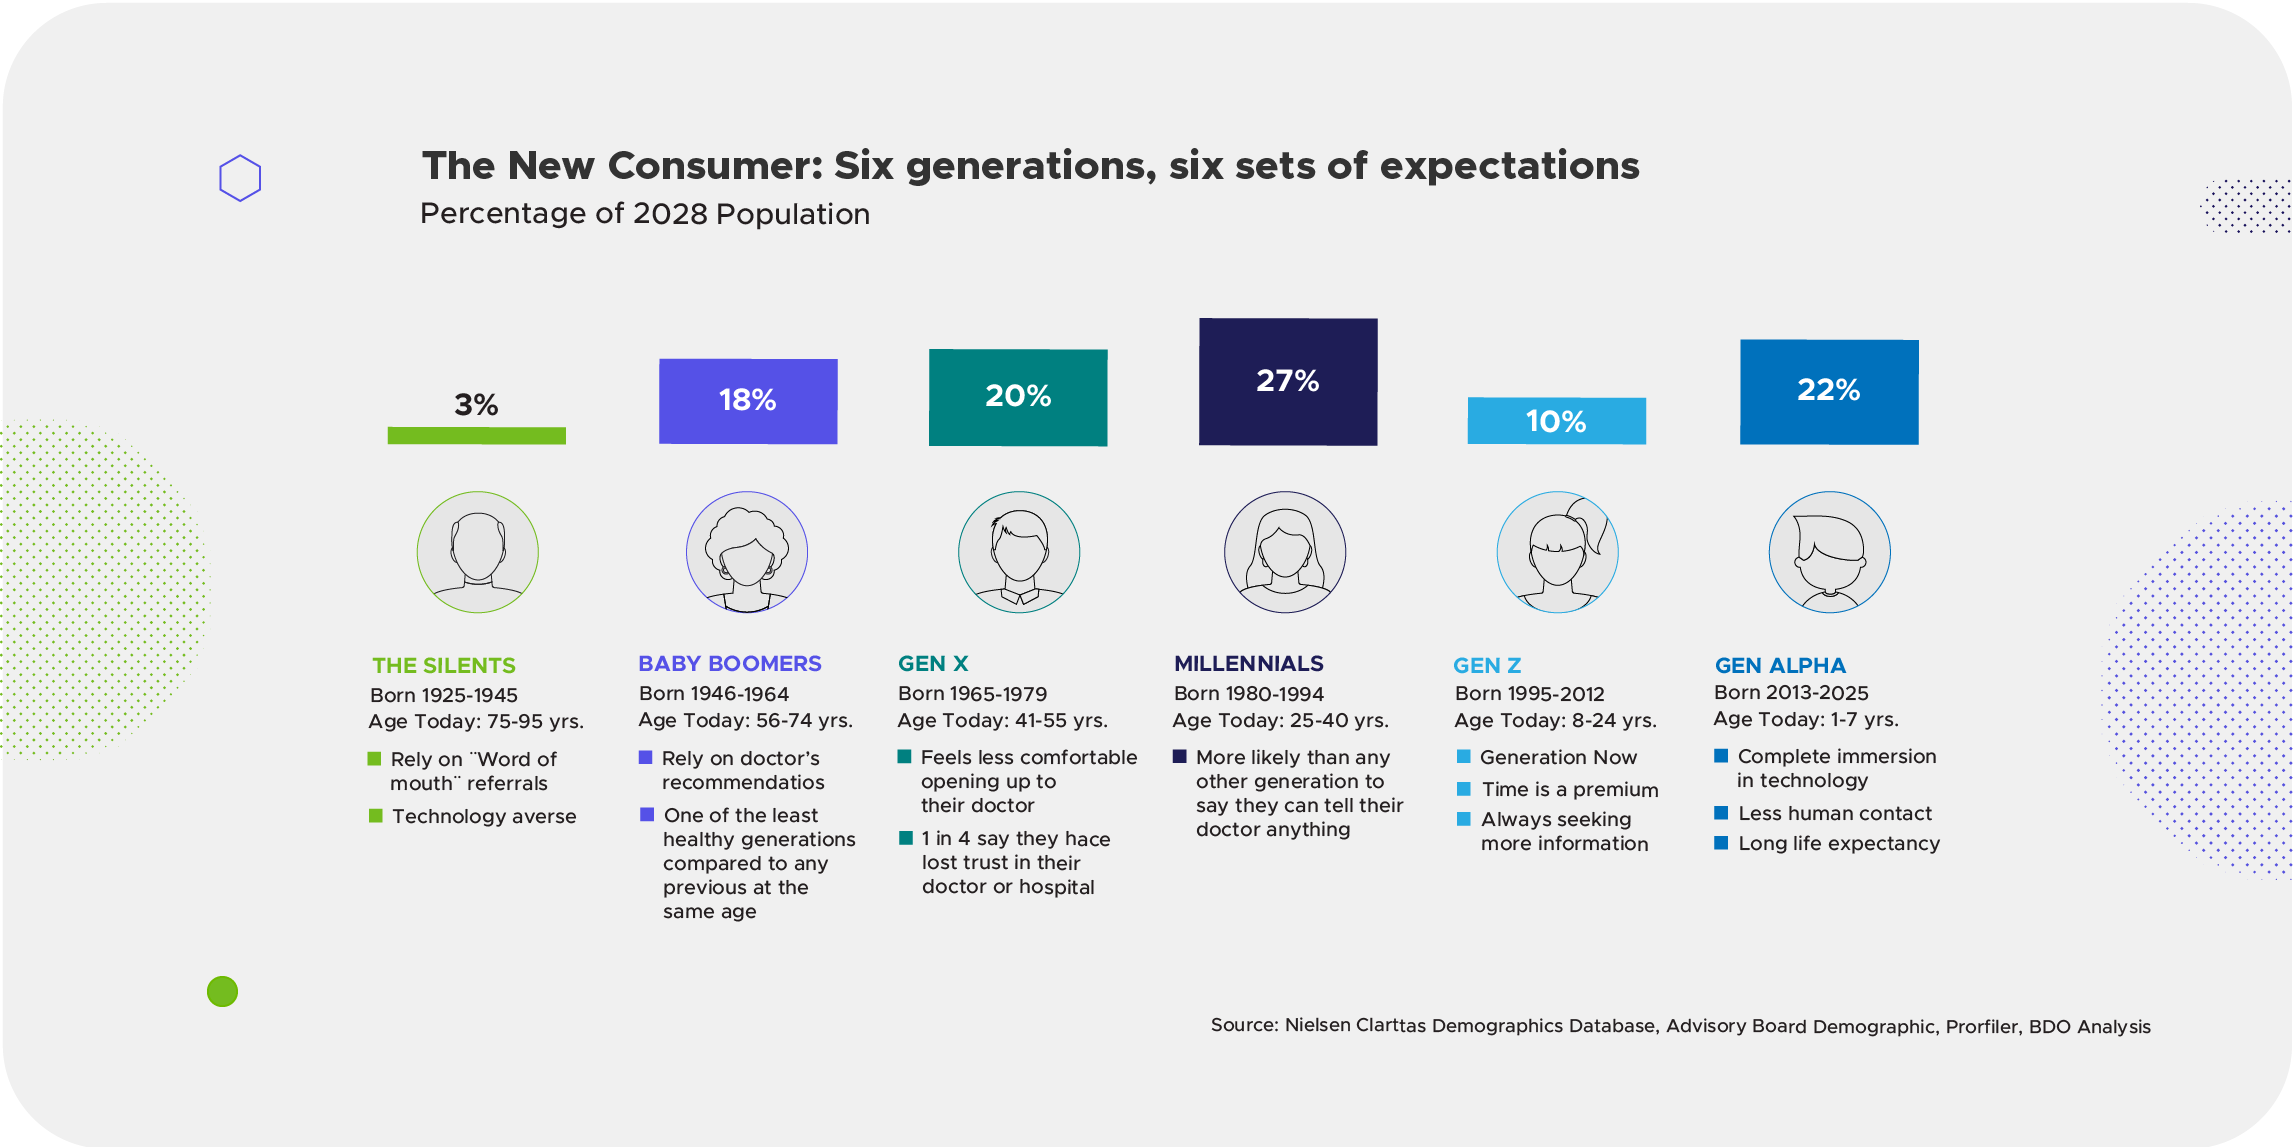 The New Consumer: Six generations, six sets of expectations